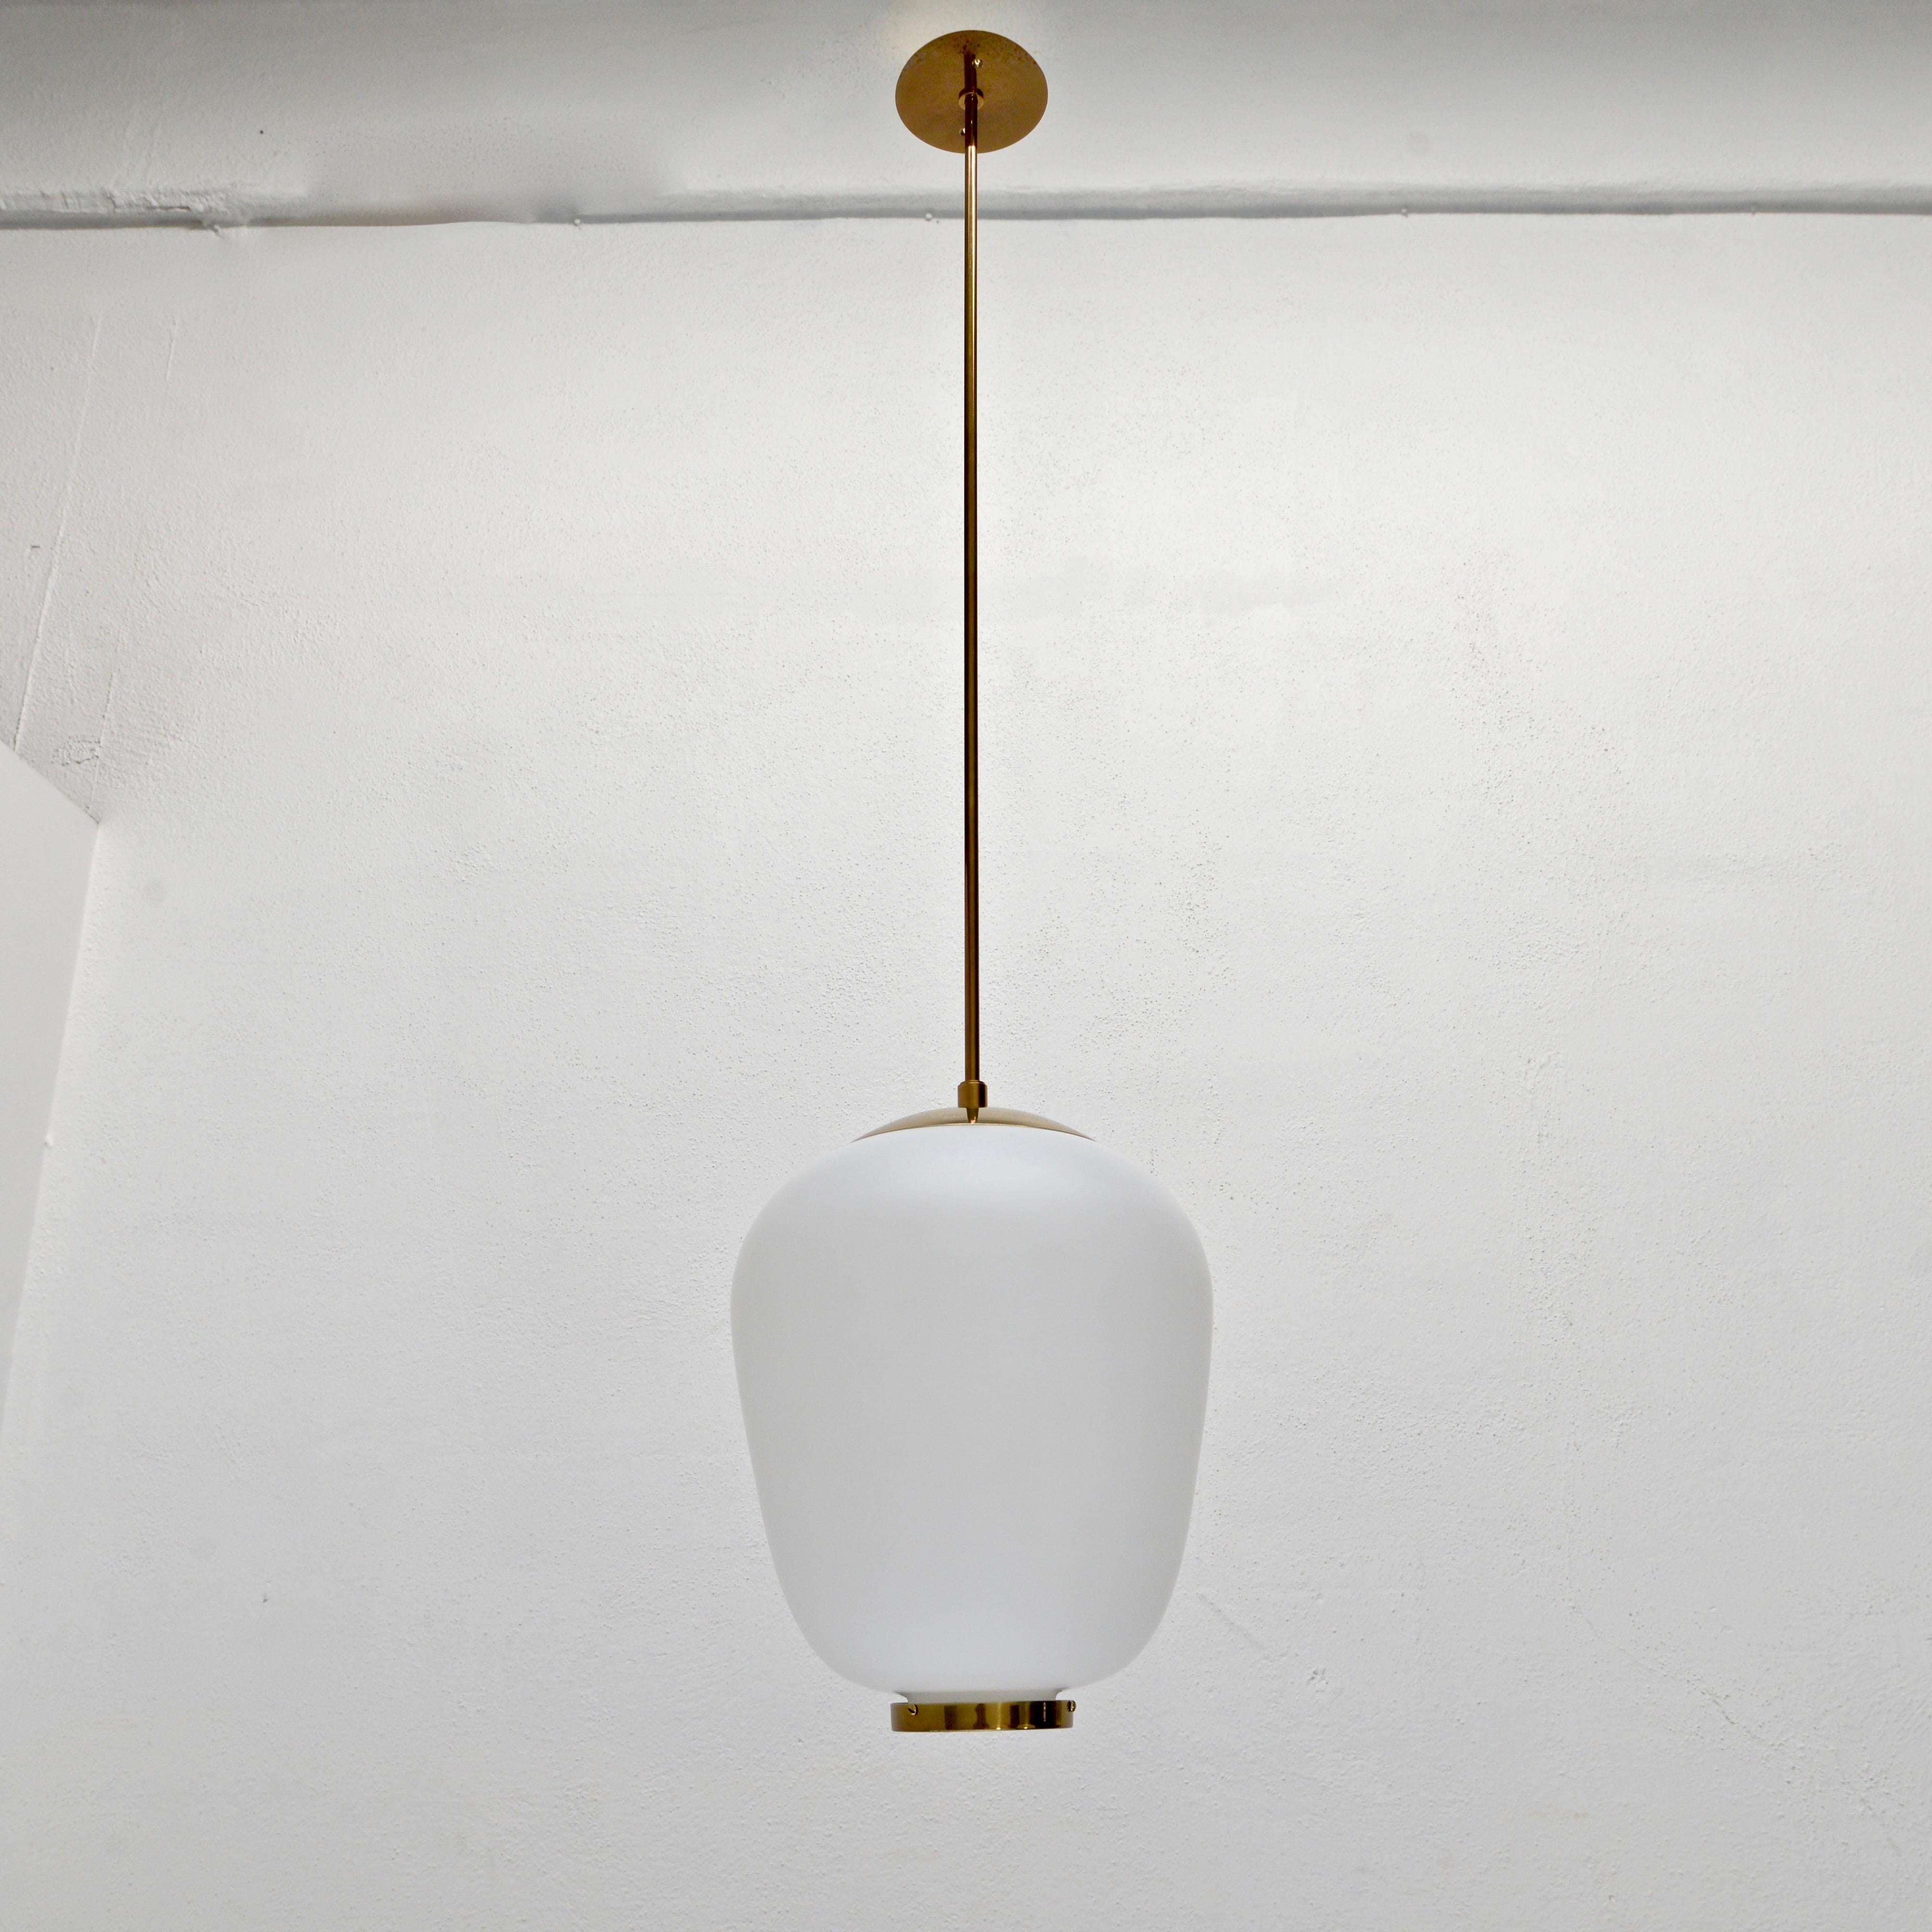 Classical beautiful naturally aged brass and glass 1950s Stilnovo pendant from Italy. With a single E26 medium based sockets and wired for use in the US. Light bulbs included with order.
Measurements:
OAD: 45” can be adjusted
Diameter